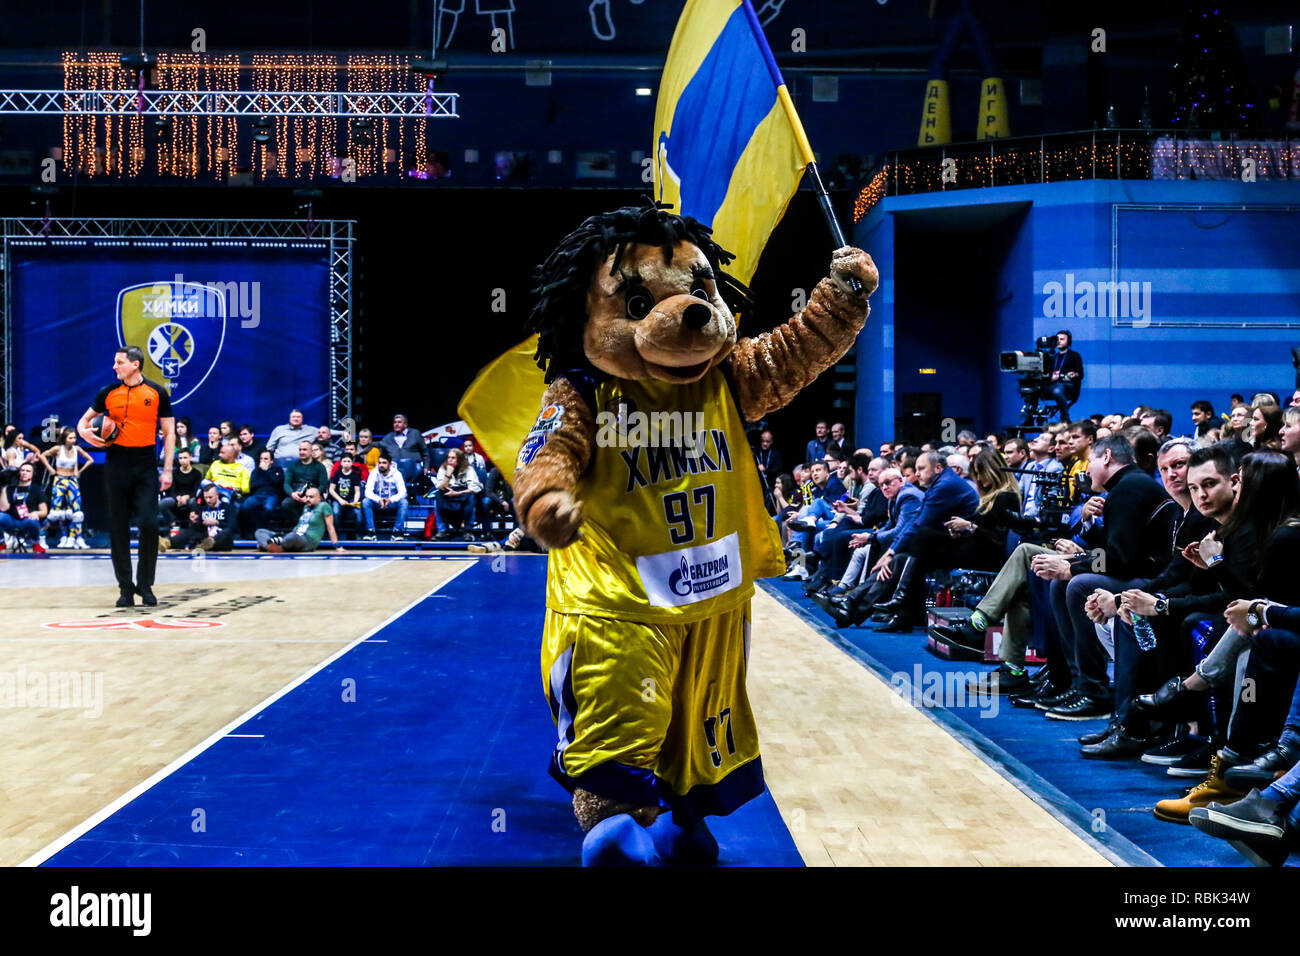 Khimki Moscow mascot cheers on the crowd during its match against Fenerbahce Istanbul in Round 17 of the Turkish Airlines Euroleague  game of the 2018-2019 season. Khimki Moscow beat Fenerbahce Istanbul in overtime, 84-78. Stock Photo